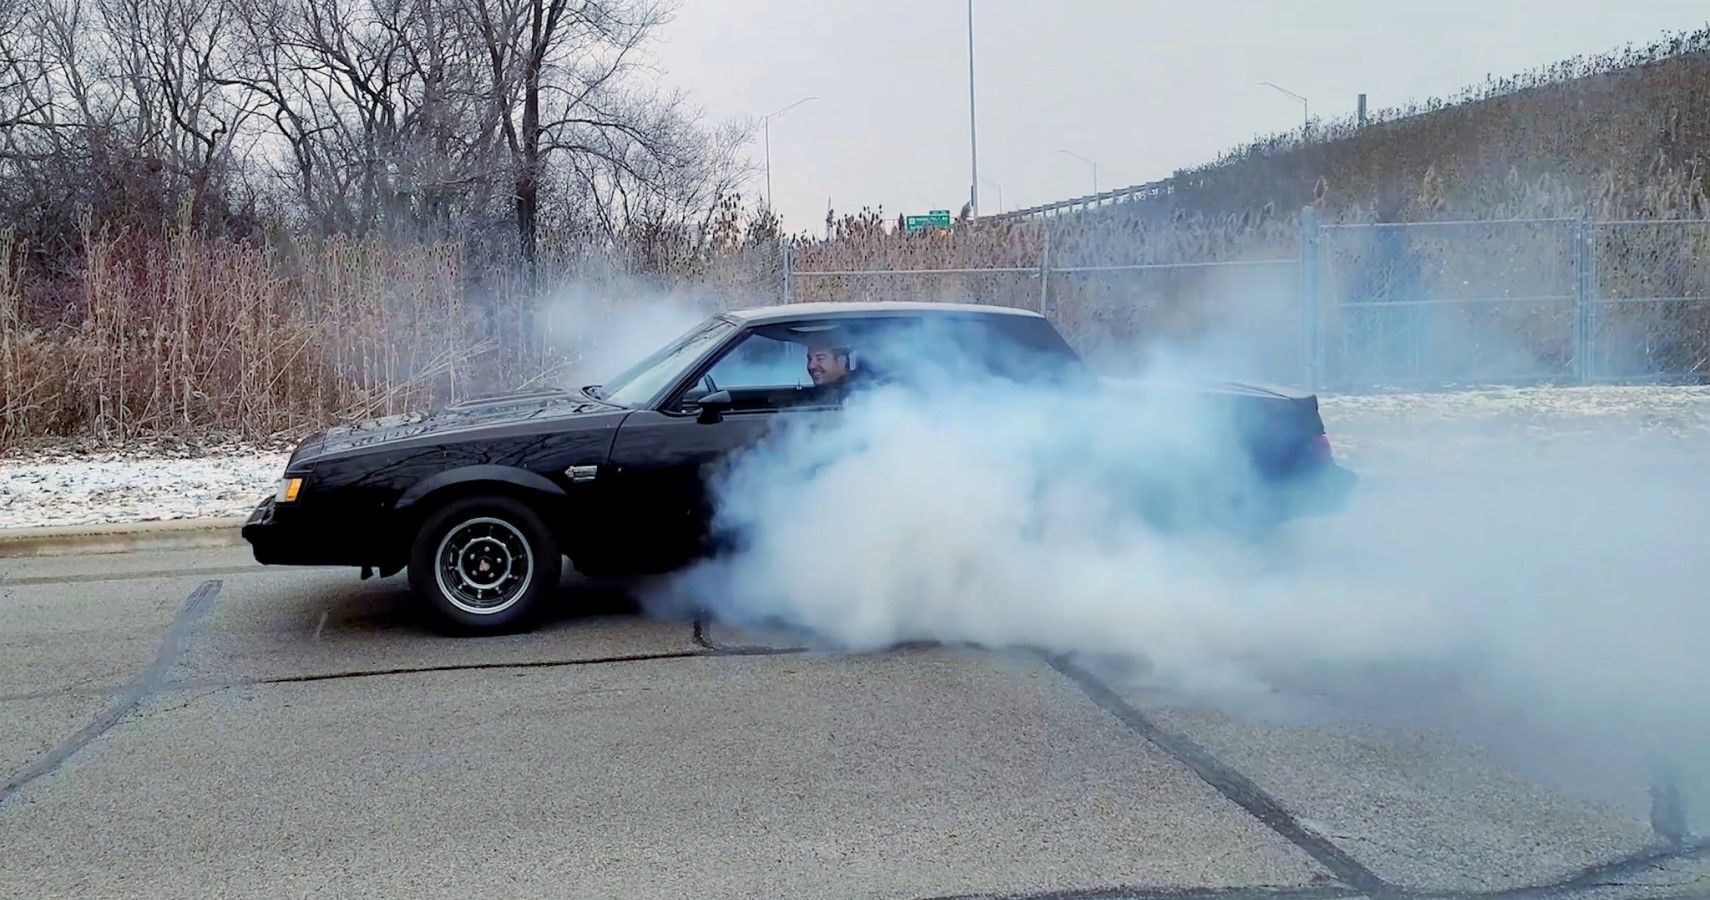 LegitStreetCars modified Buick Grand National burnout side view